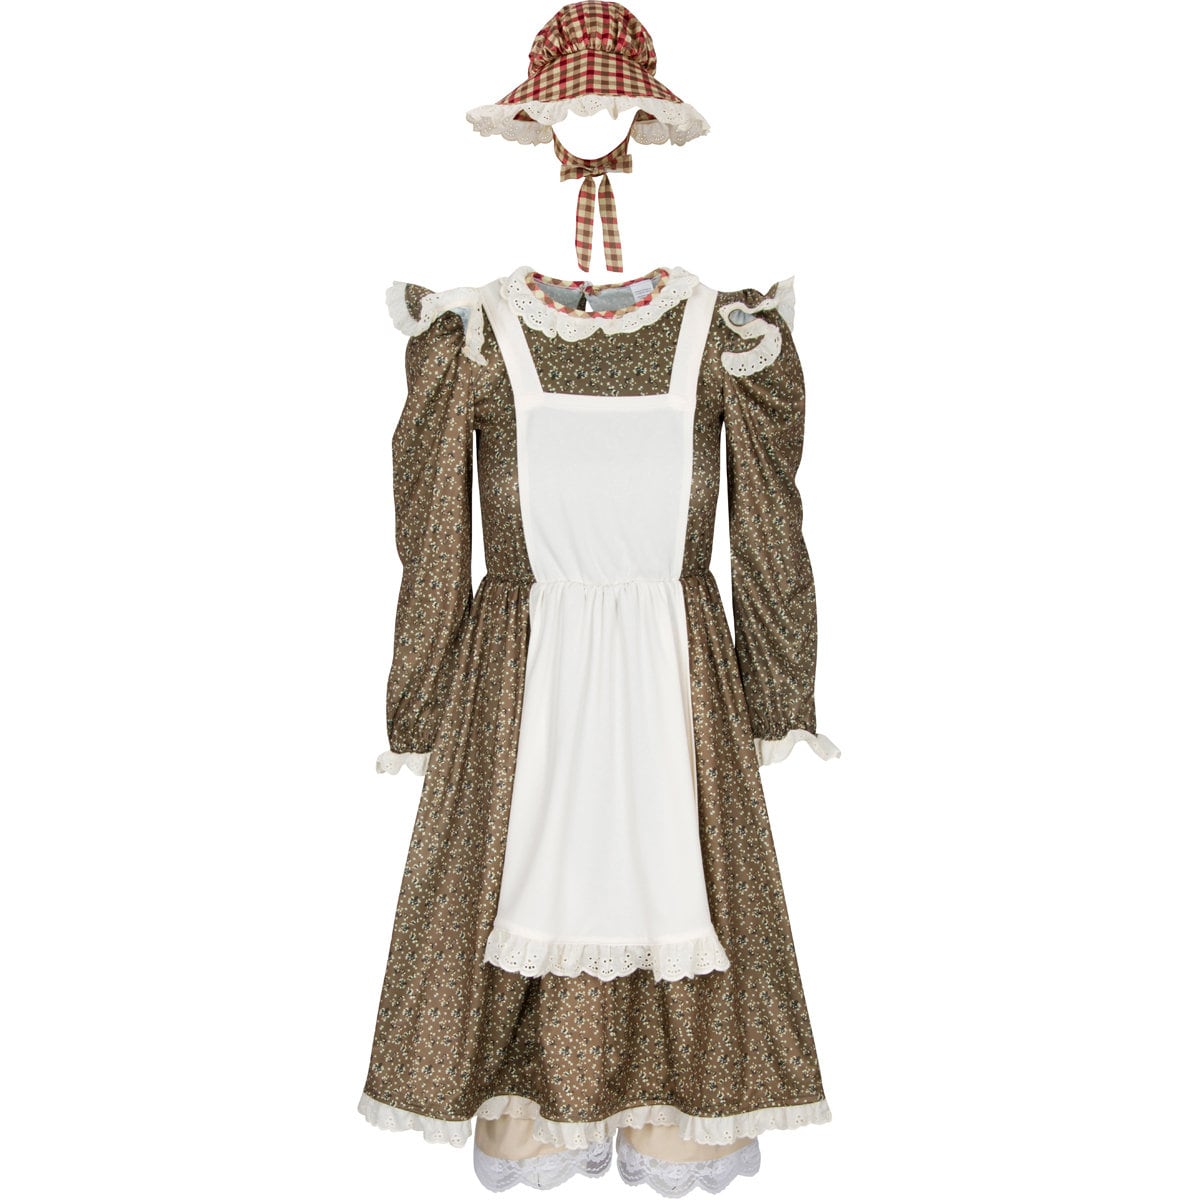 American Frontier Pioneer Girl Dress with Matching Bonnet and Apron